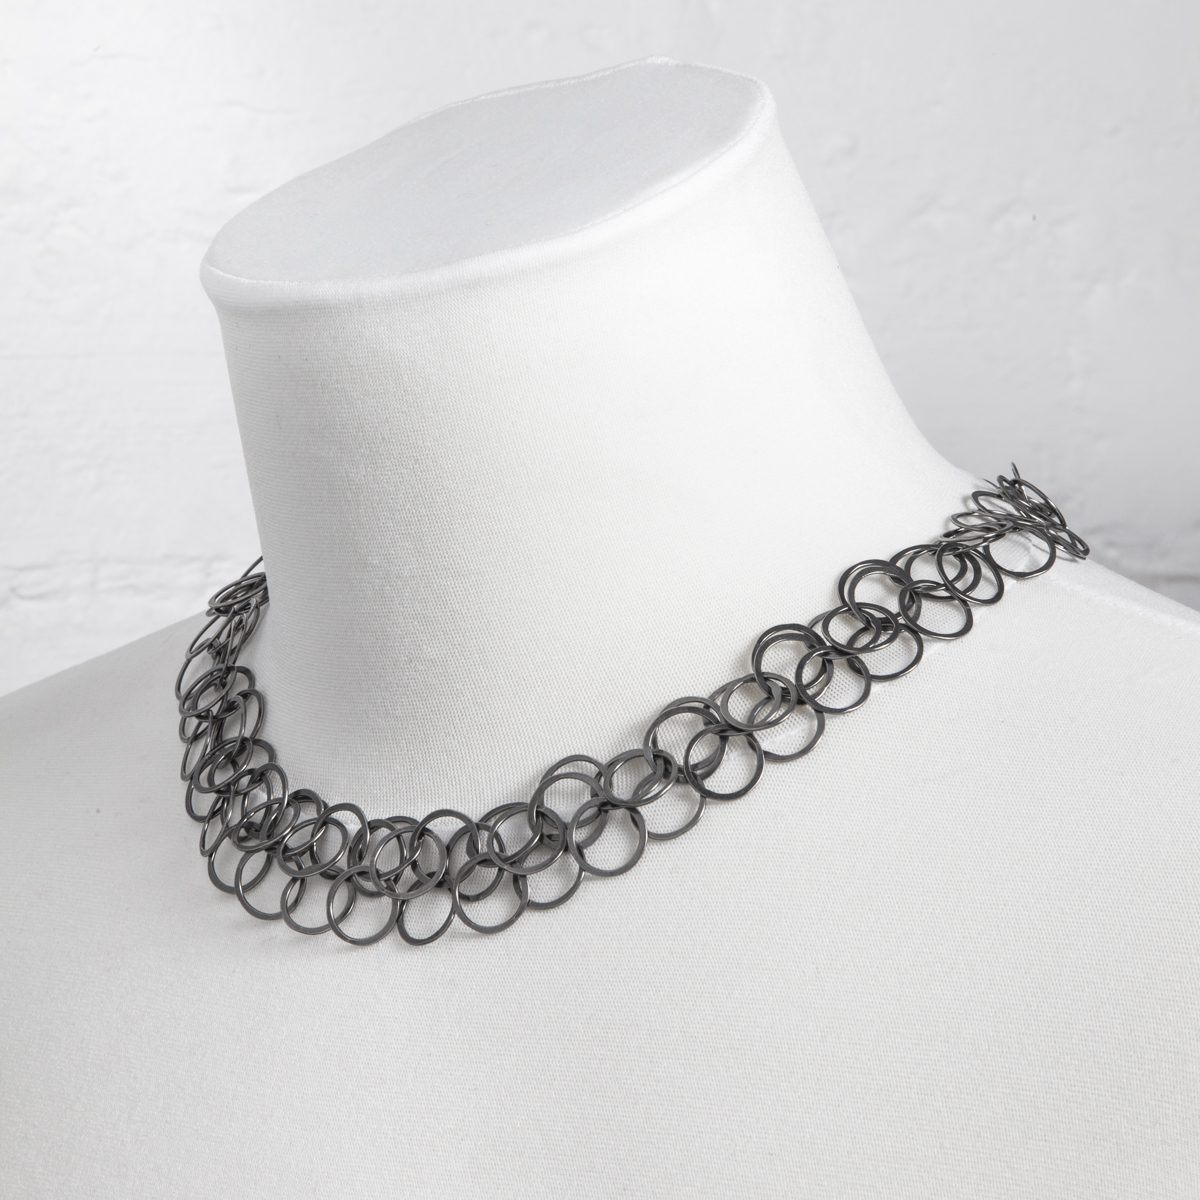 Bay necklace oxidised silver | Necklaces / Pendants by Joanne Thompson